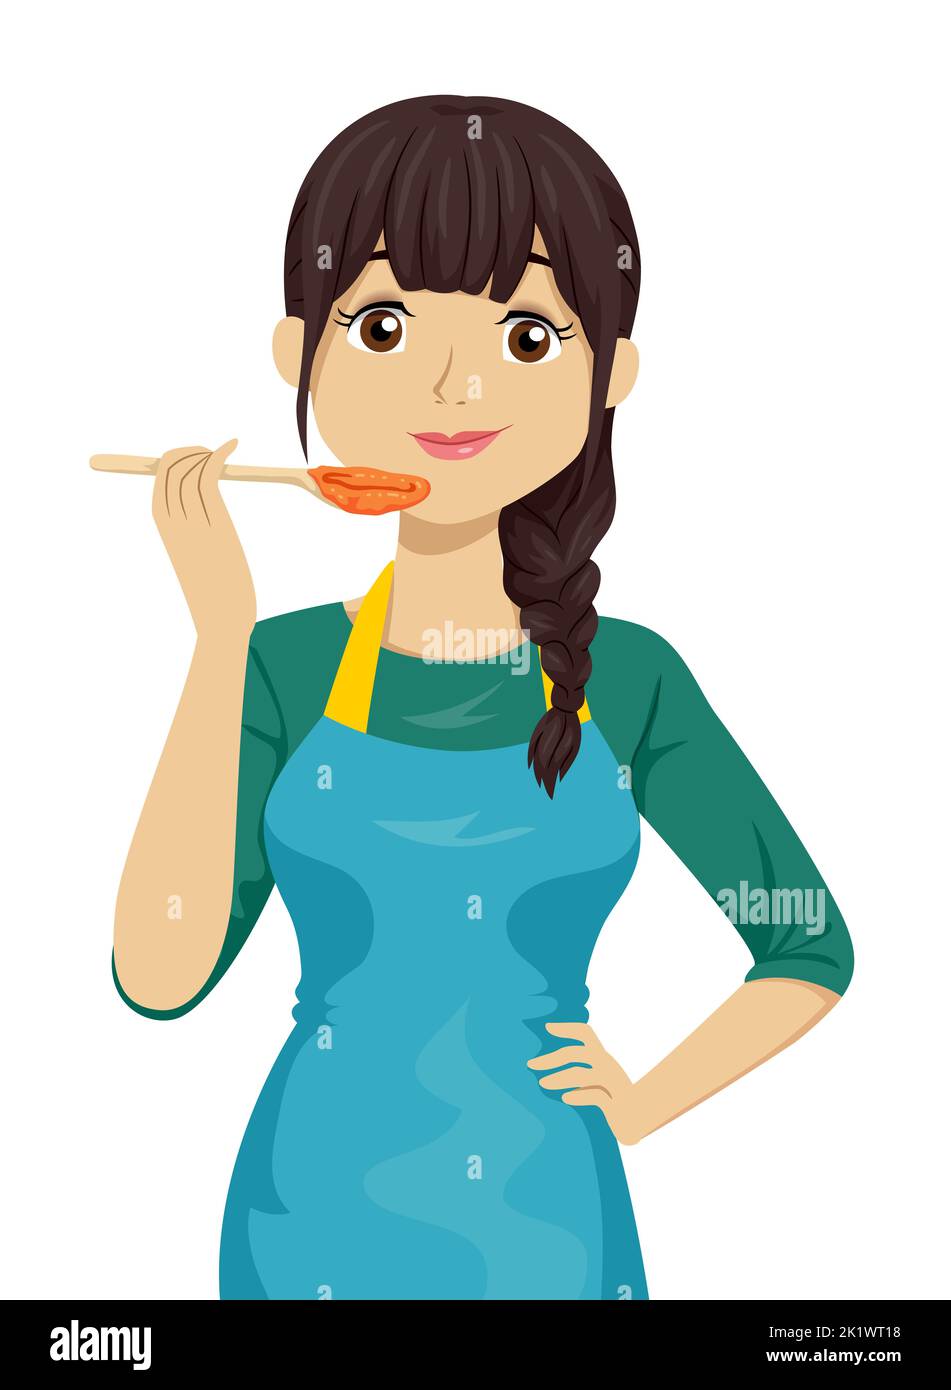 Illustration of Teen Girl Wearing Apron and Holding Spoon, Tasting Food after Cooking Stock Photo